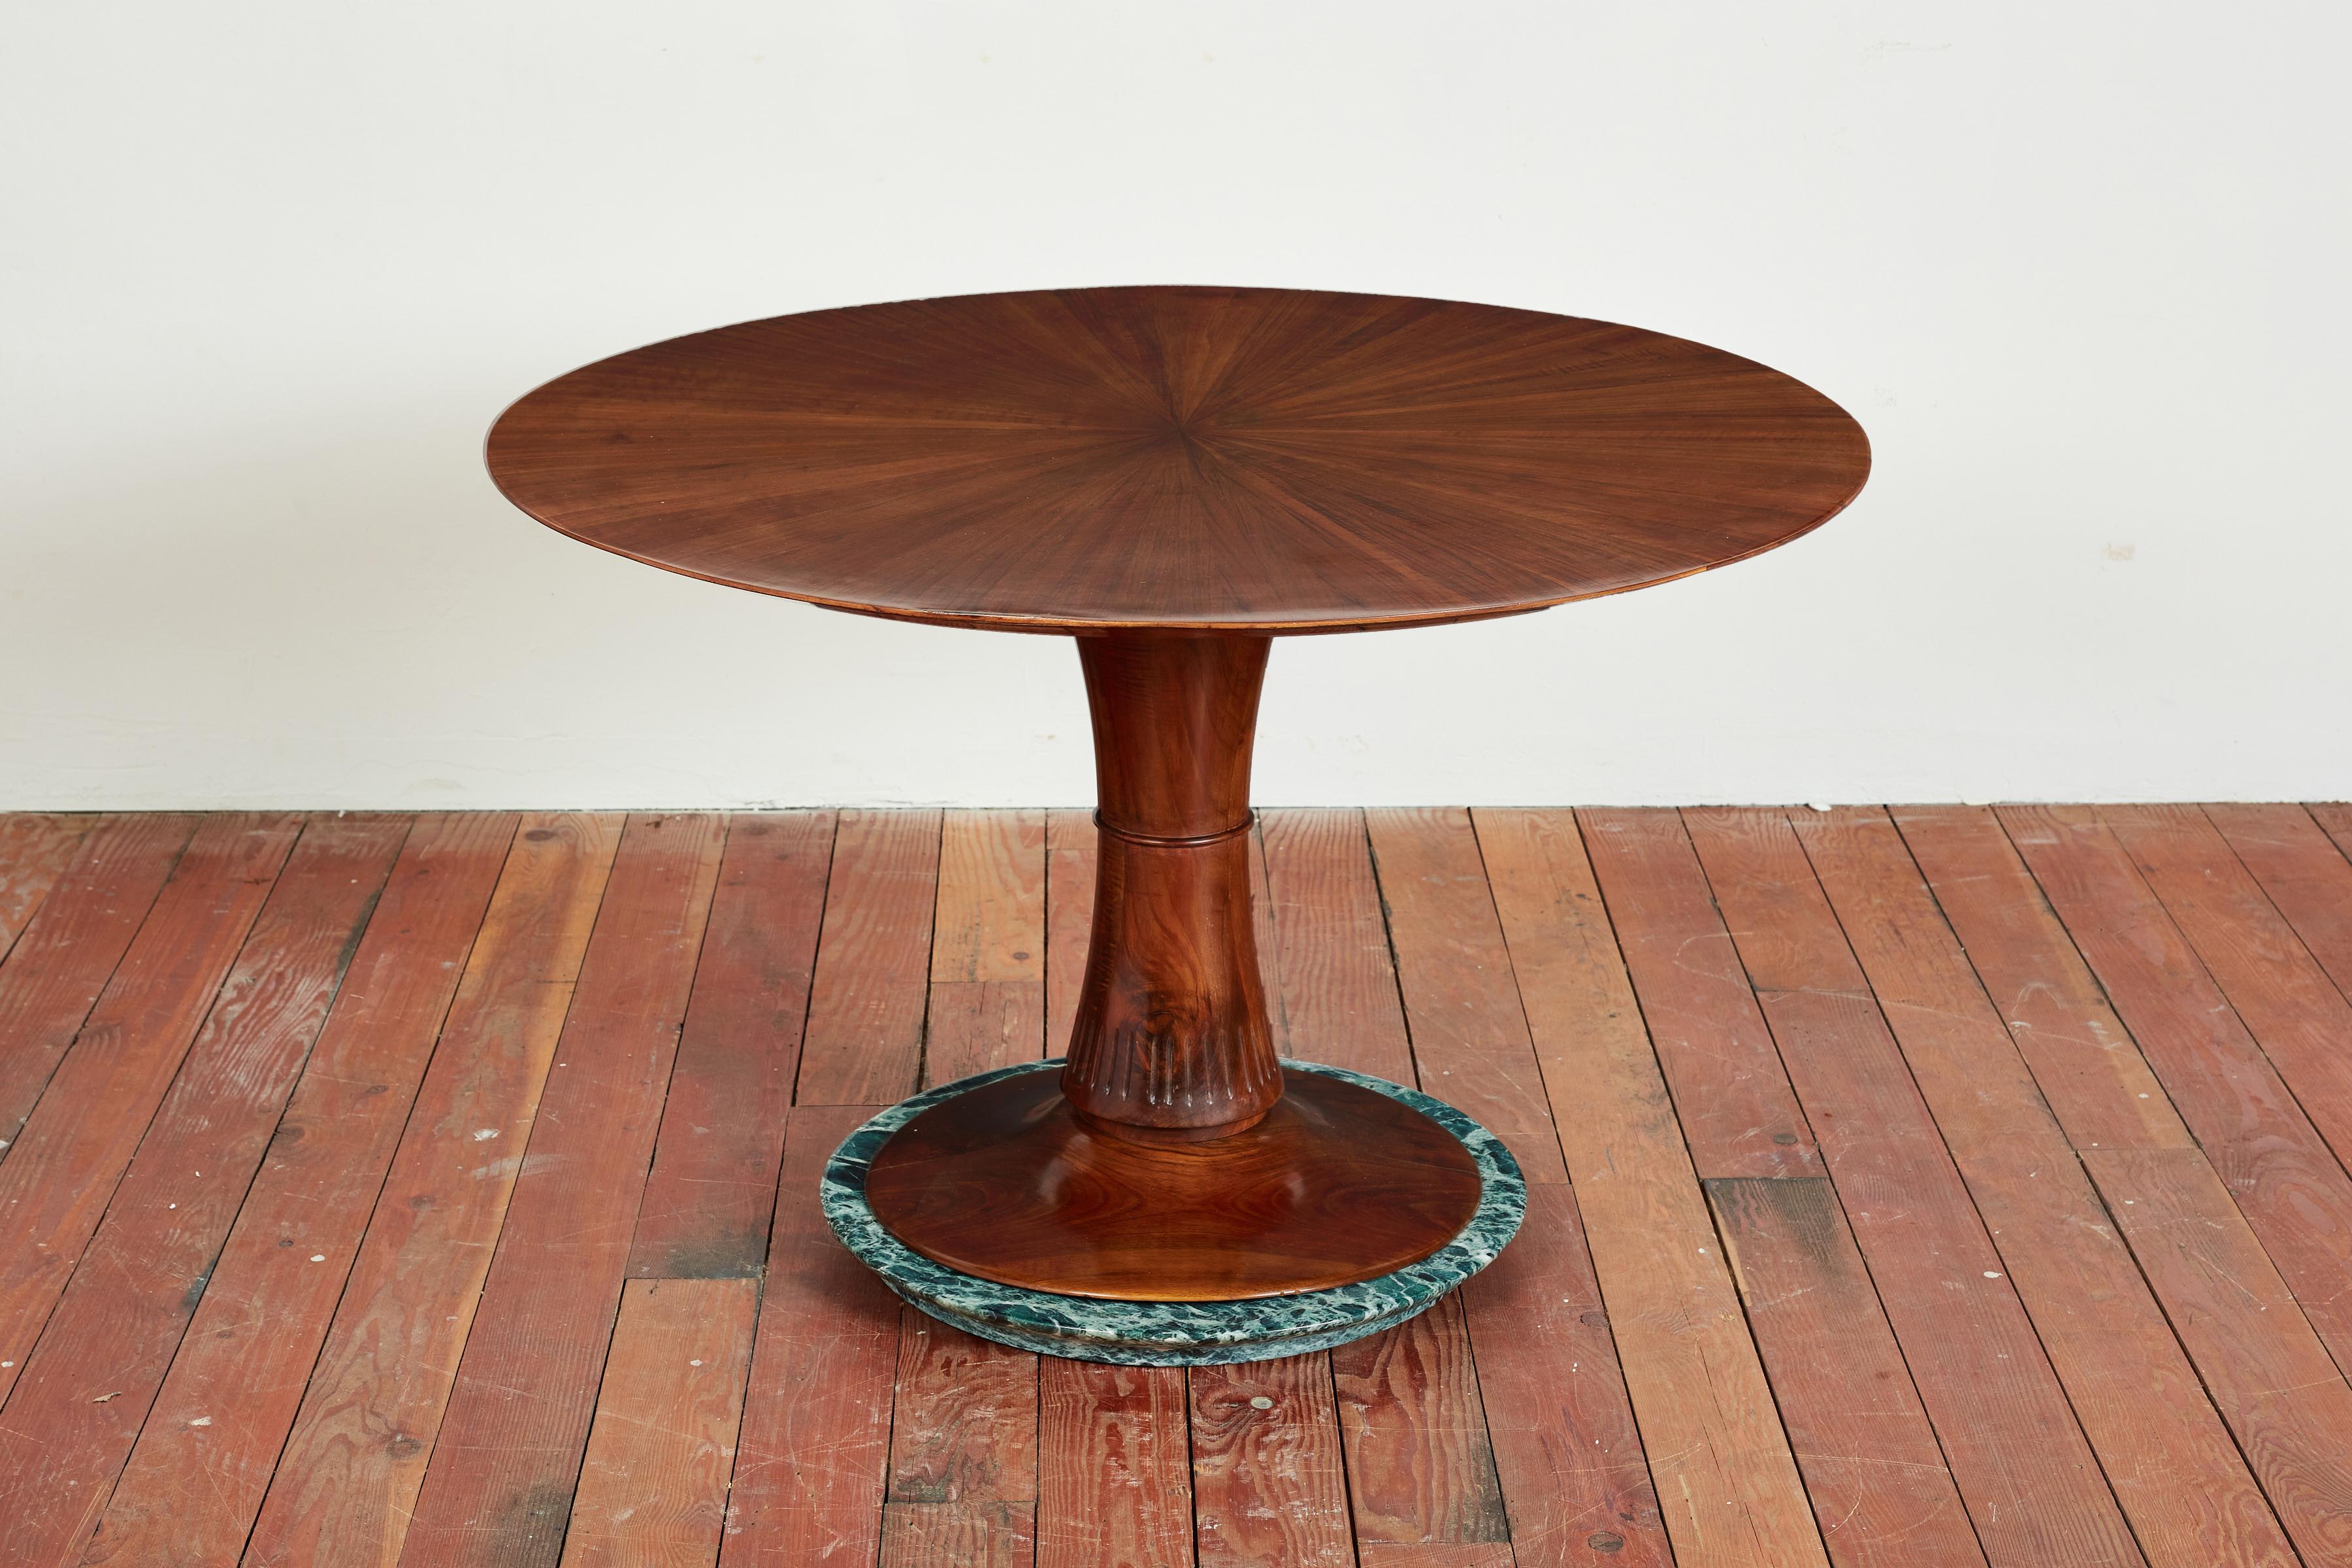 Exquisite circular wooden center table - 1950's, Italy 
Patterned wood top in the style of Carlo de Carli 
Carved wood pedestal base with intricate detailing
Green marble base.